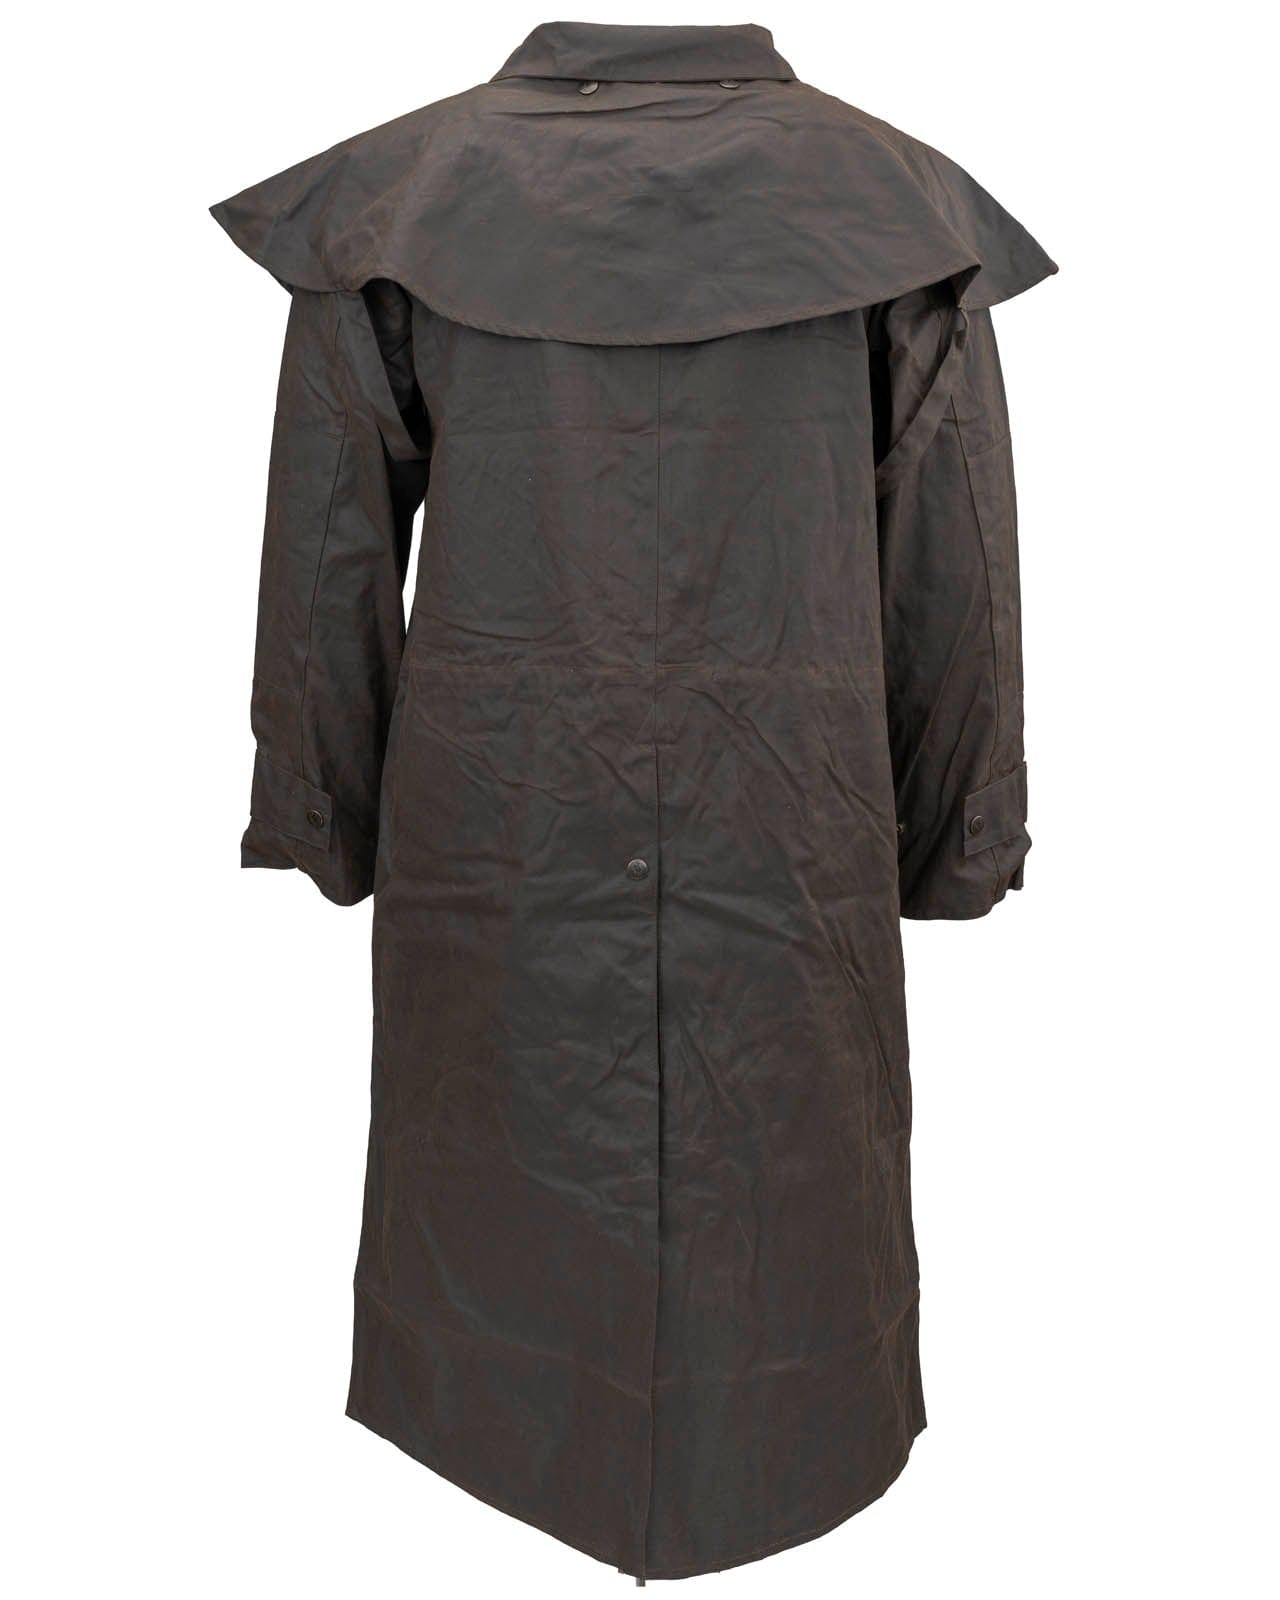 Australian Full Length Duster Outback Coat in Nubuck Cowhide Leather –  Wested Leather Co